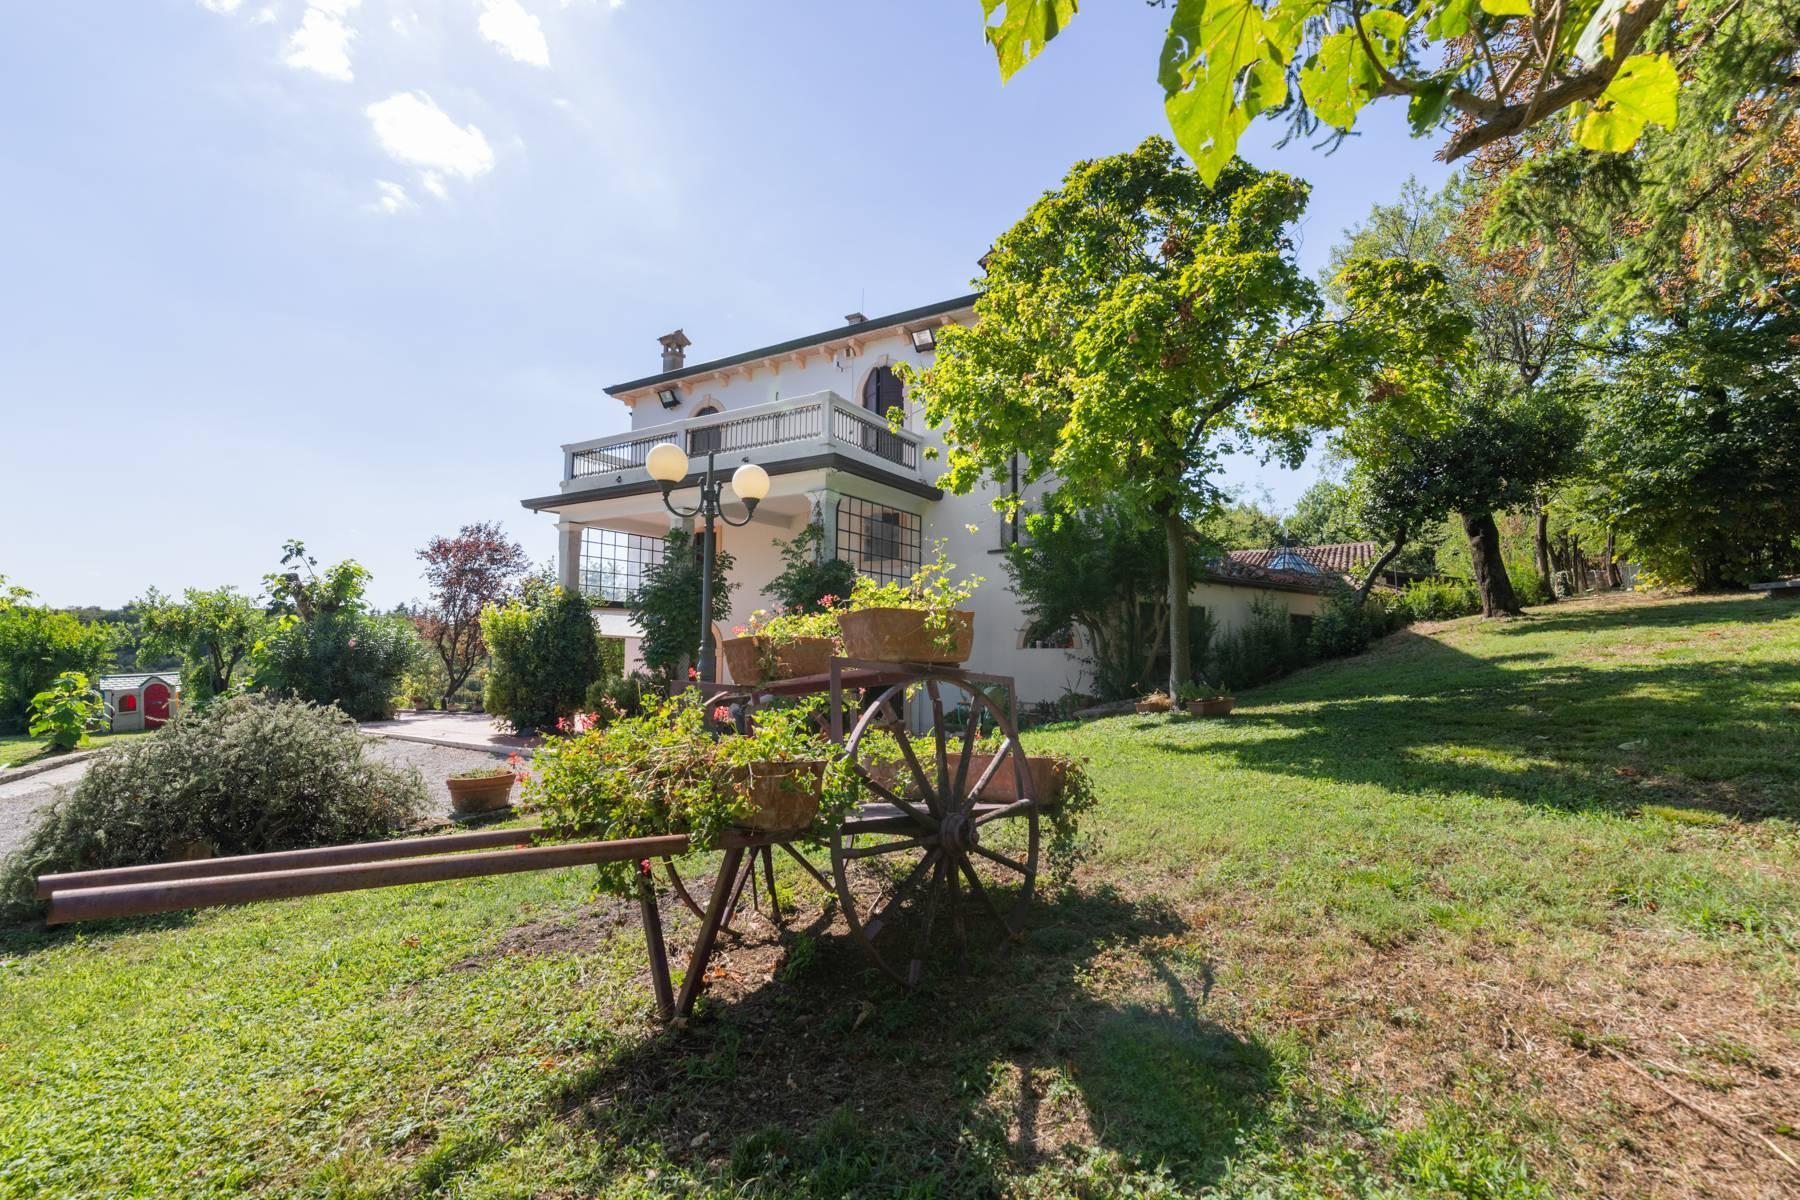 Historic country villa with swimming pool, tennis court and estate on the hills of Verona - 7